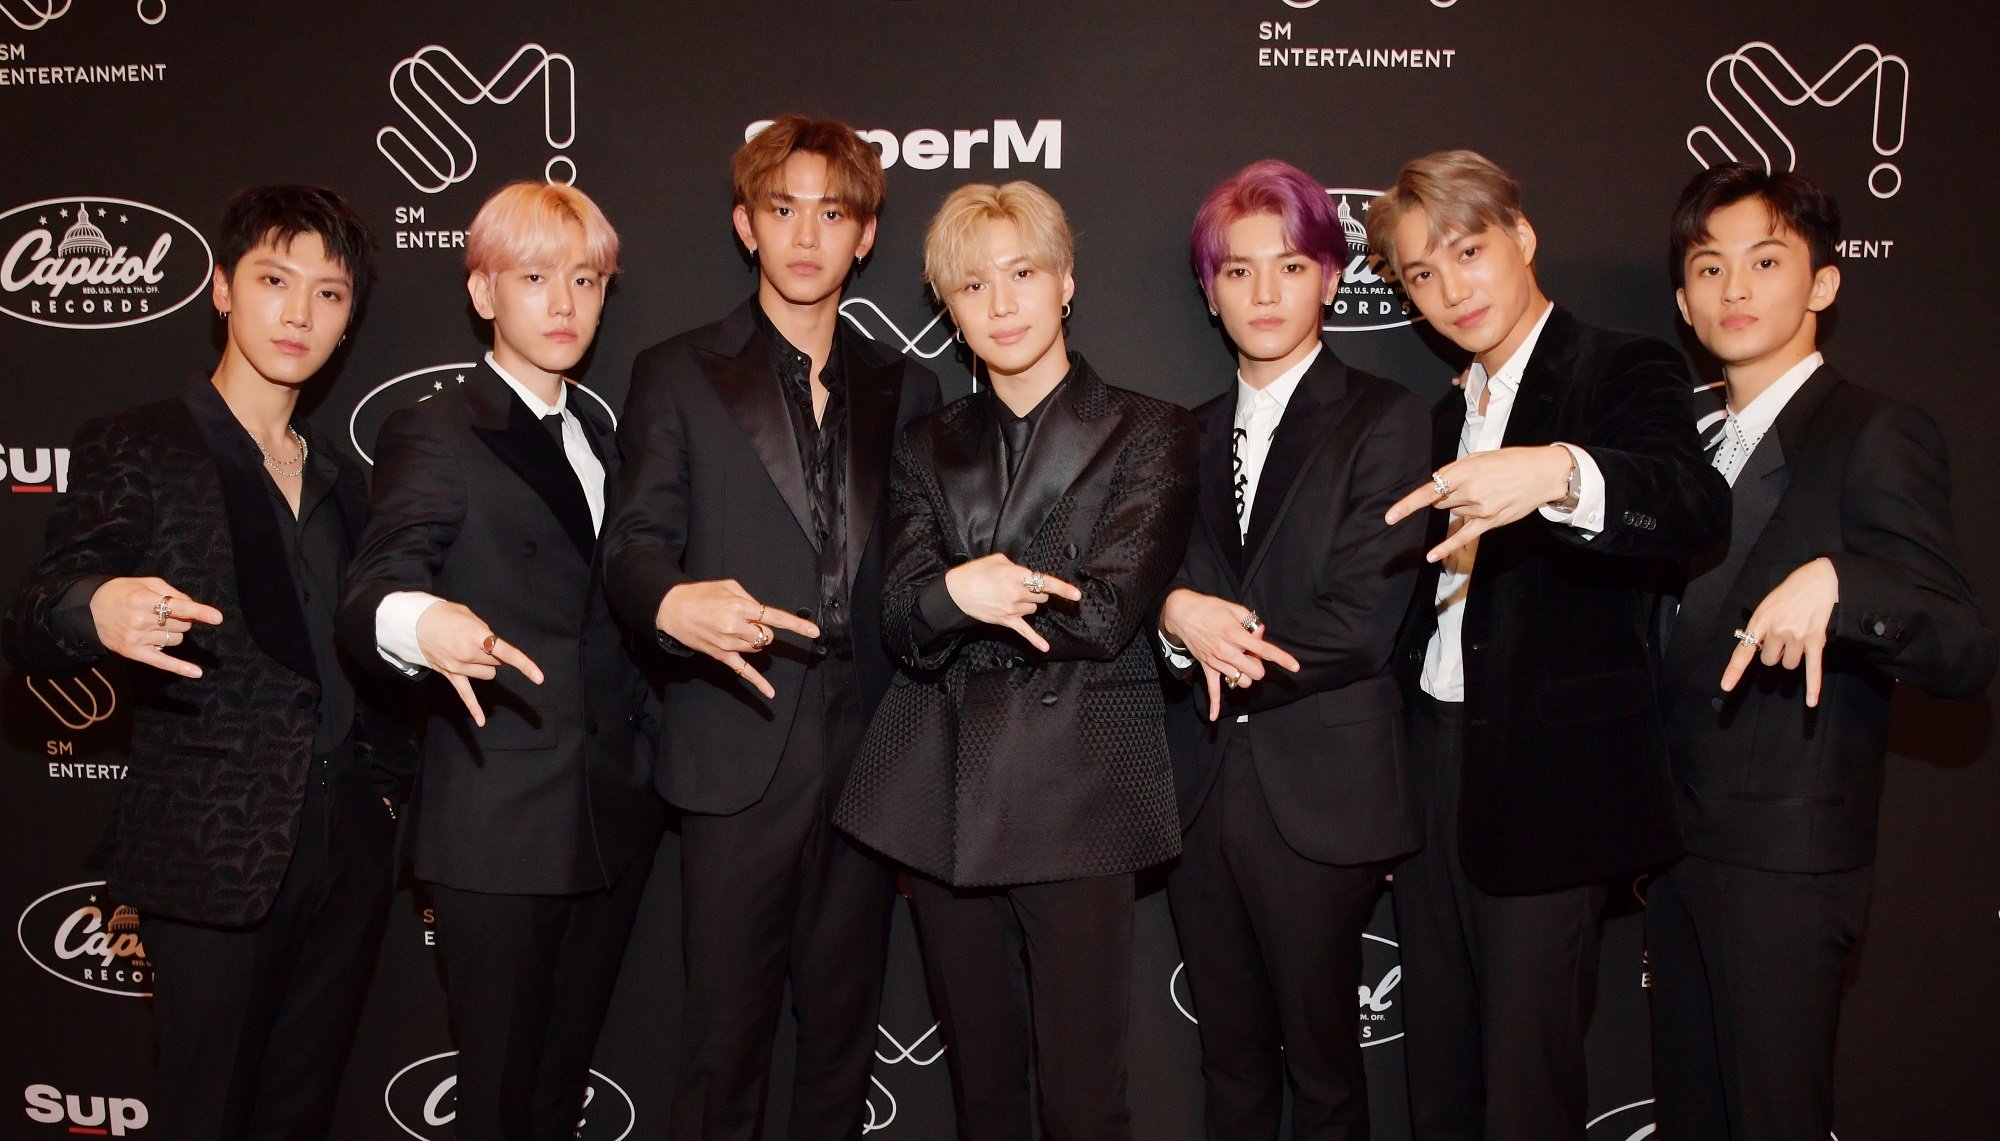 Ten, Baekhyun, Lucas, Taemin, Taeyong, Kai, and Mark of K-pop group SuperM attend Premiere Event Live From Capitol Records in 2019